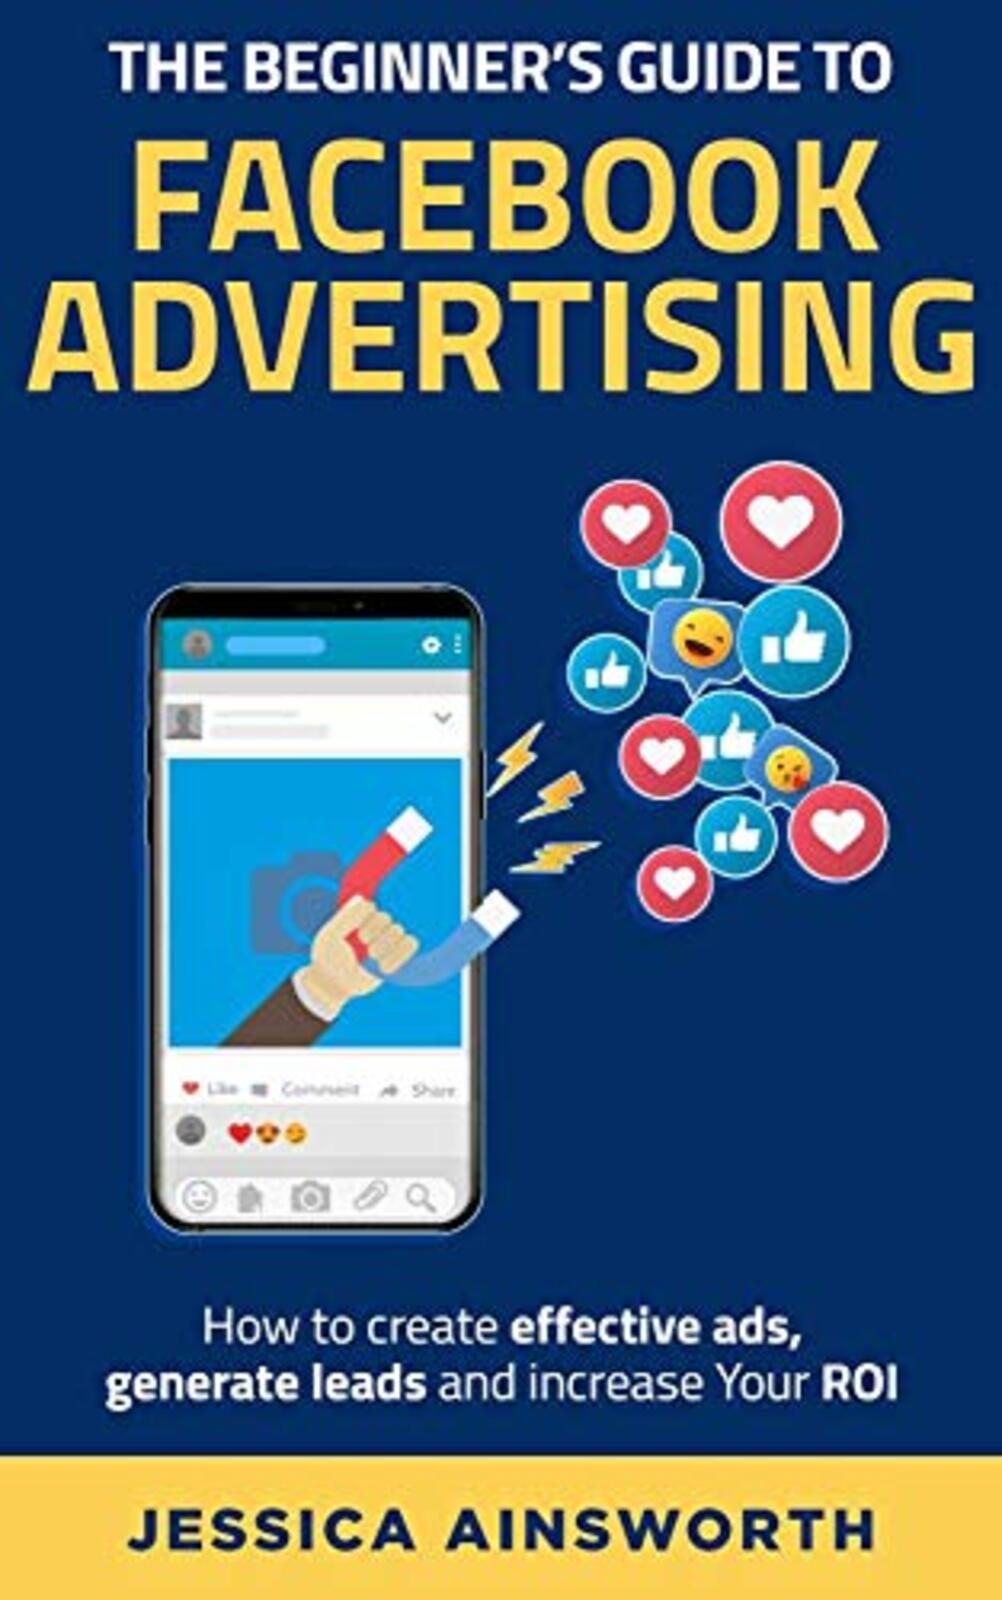 Guide to Facebook Advertising